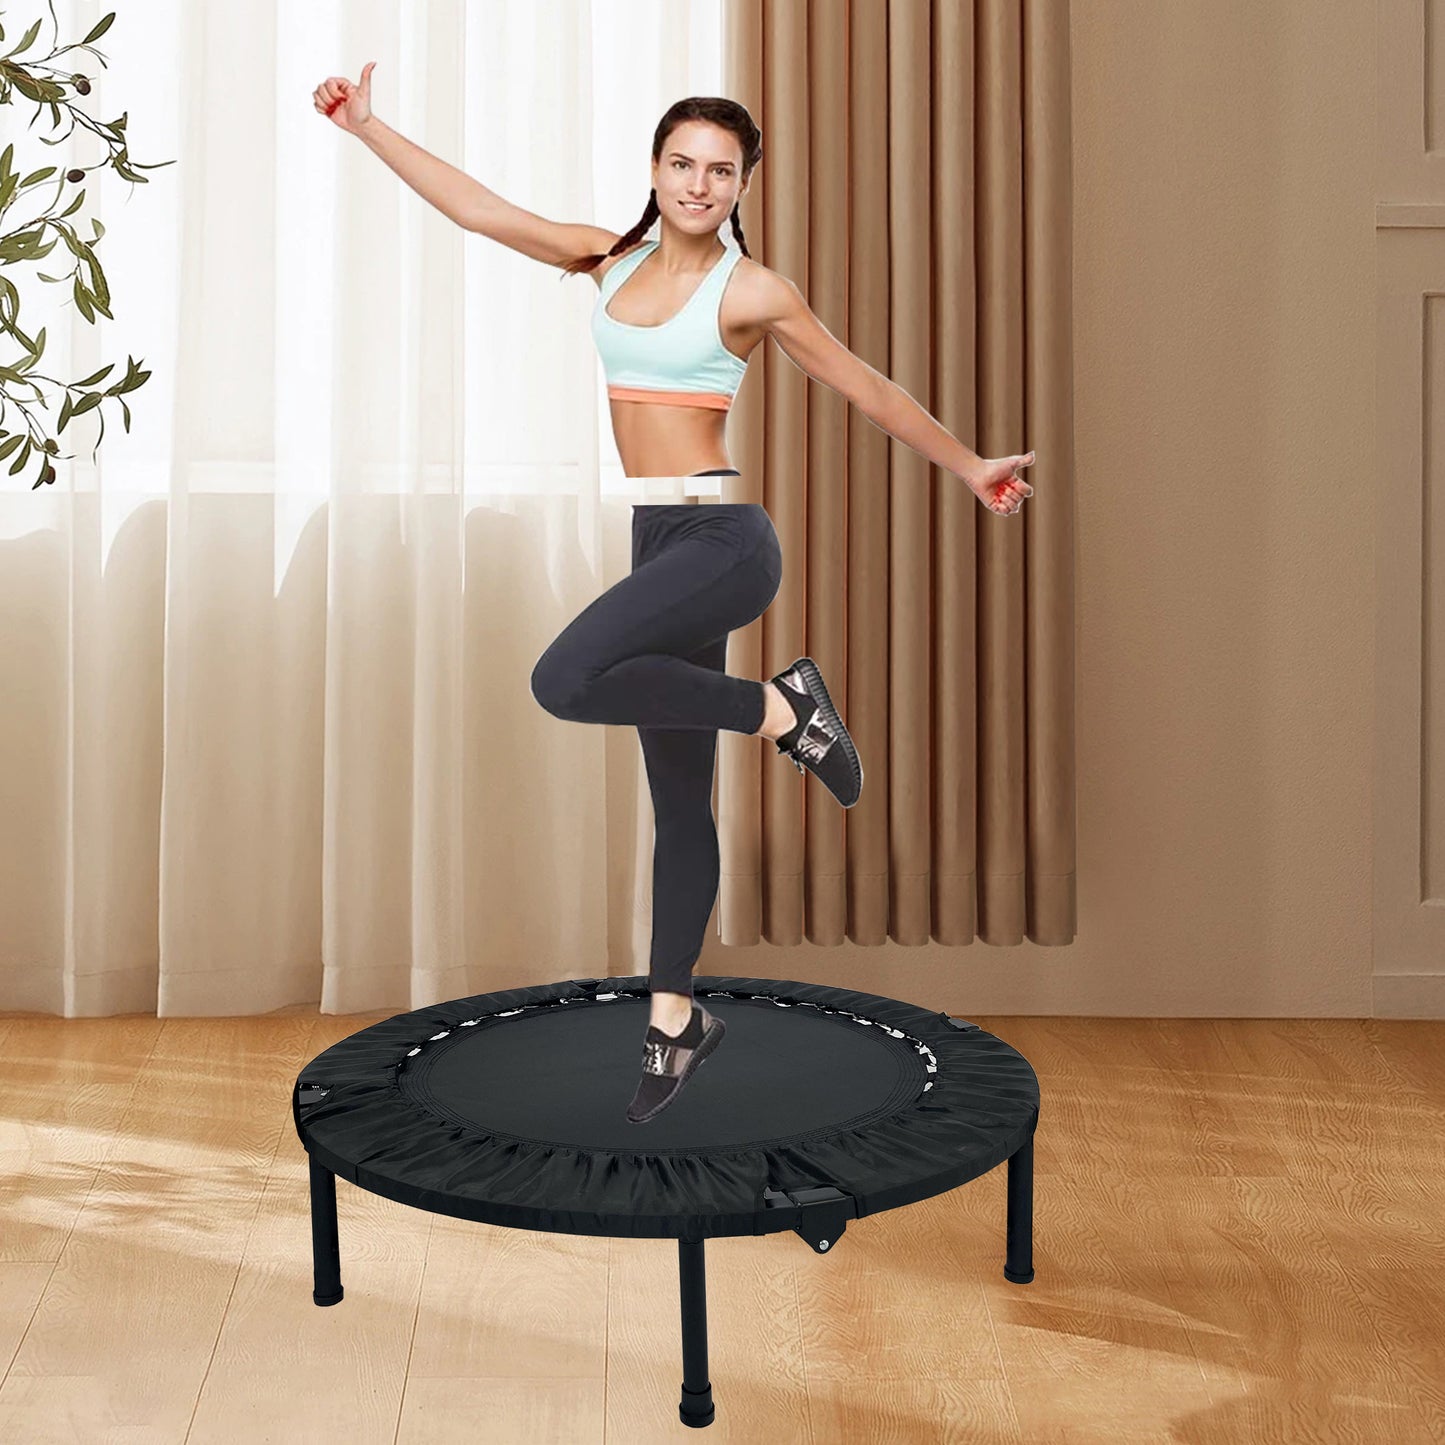 40-inch Mini Exercise Trampoline for Adults or Kids